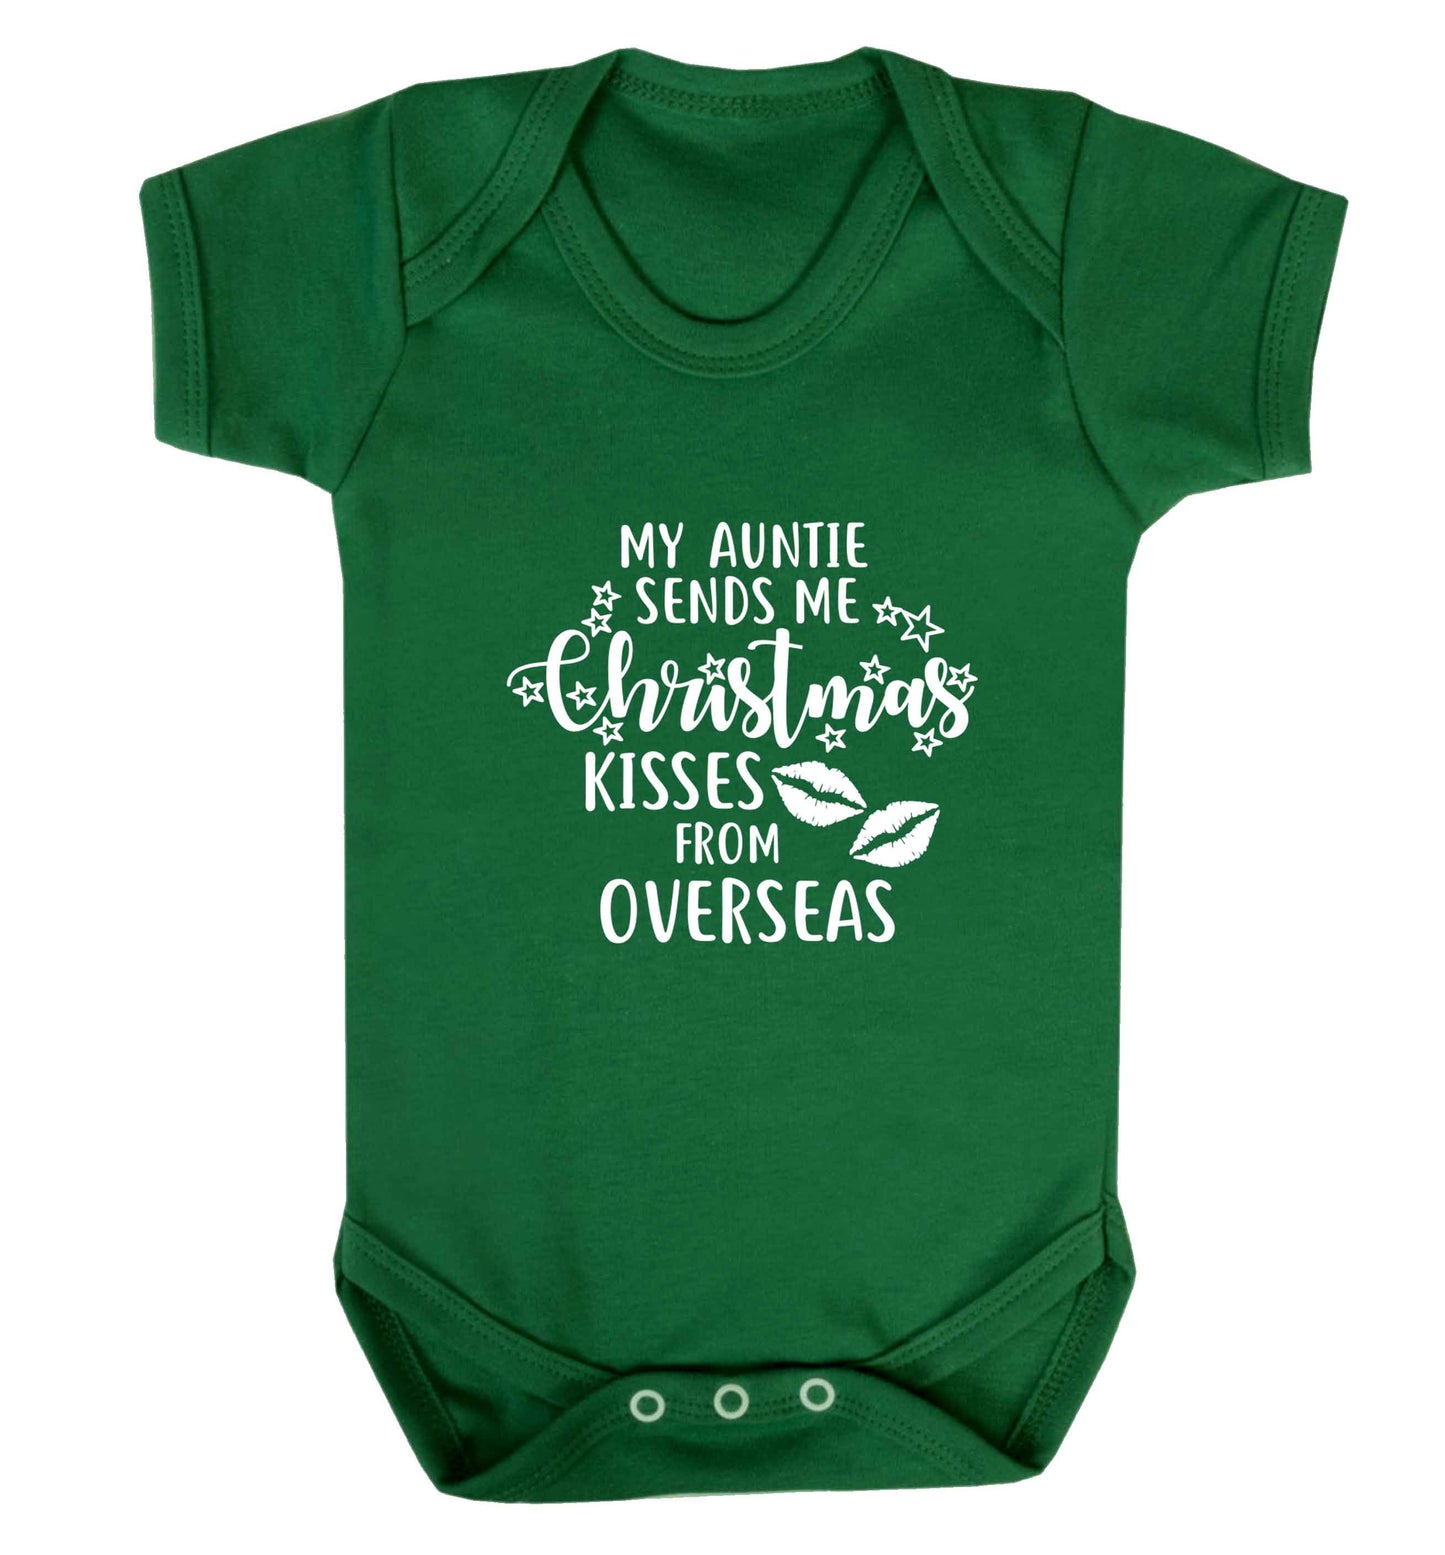 Auntie Christmas Kisses Overseas baby vest green 18-24 months